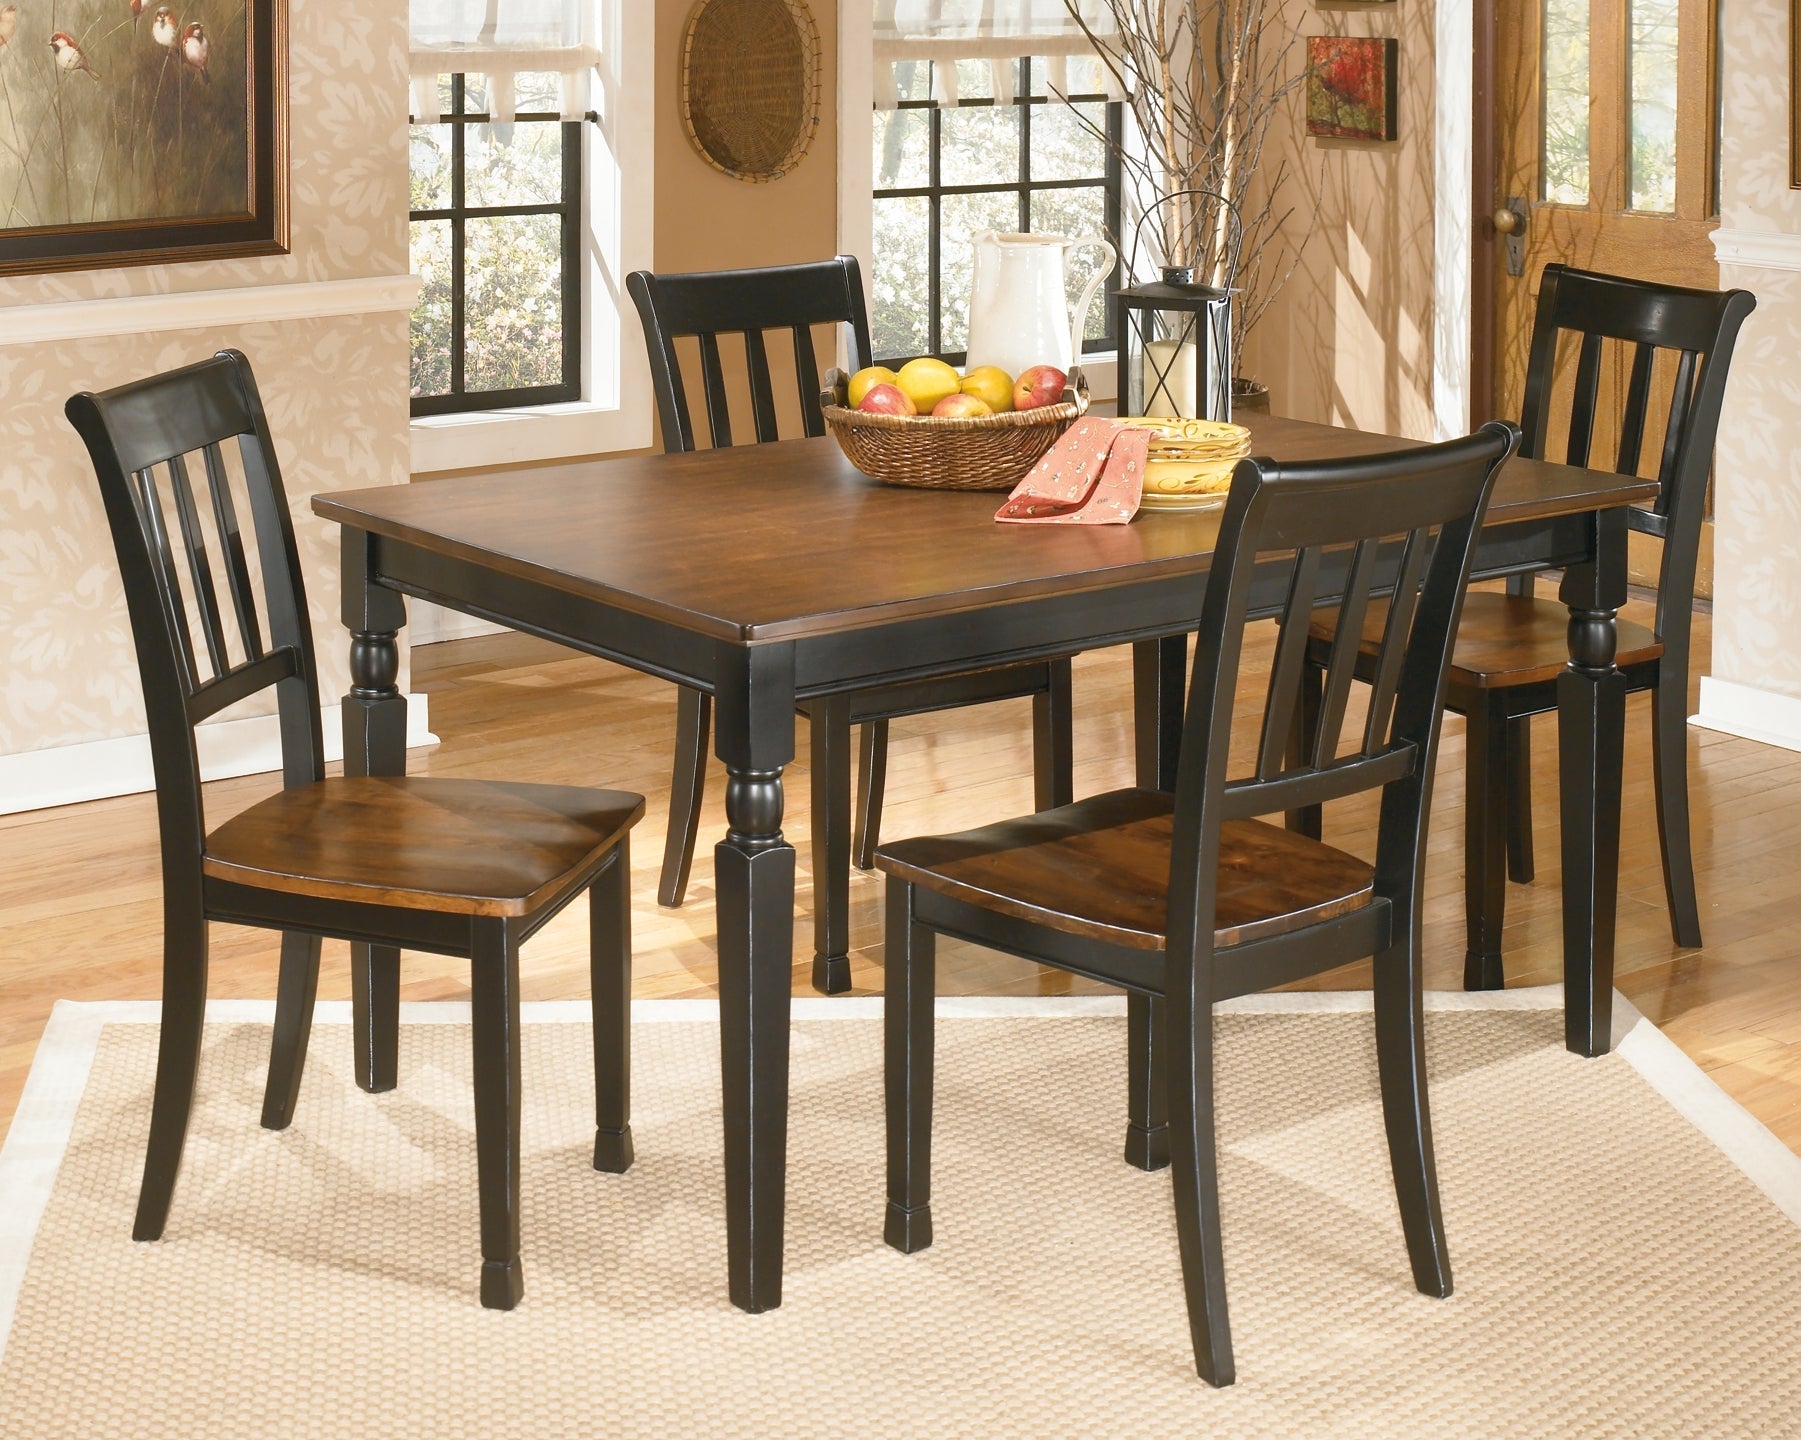 Owingsville Dining Table and 4 Chairs Rent Wise Rent To Own Jacksonville, Florida